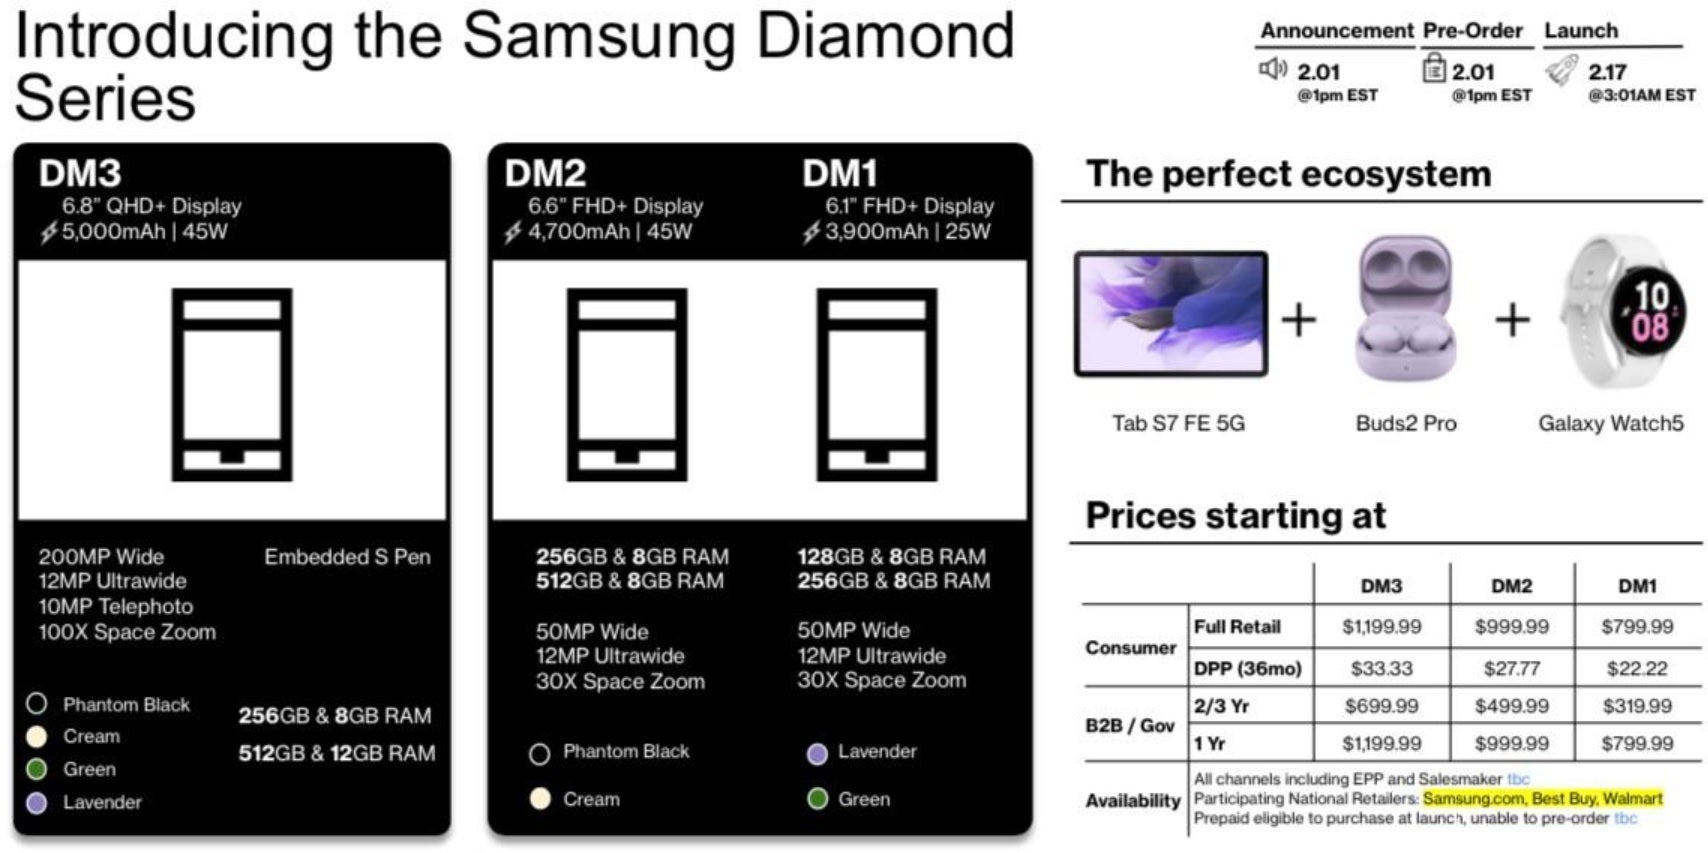 Official looking Verizon spec sheet leaks everything you'd want to know about the Galaxy S23 line - Leaked Verizon spec sheet for Galaxy S23 line reveals everything including prices